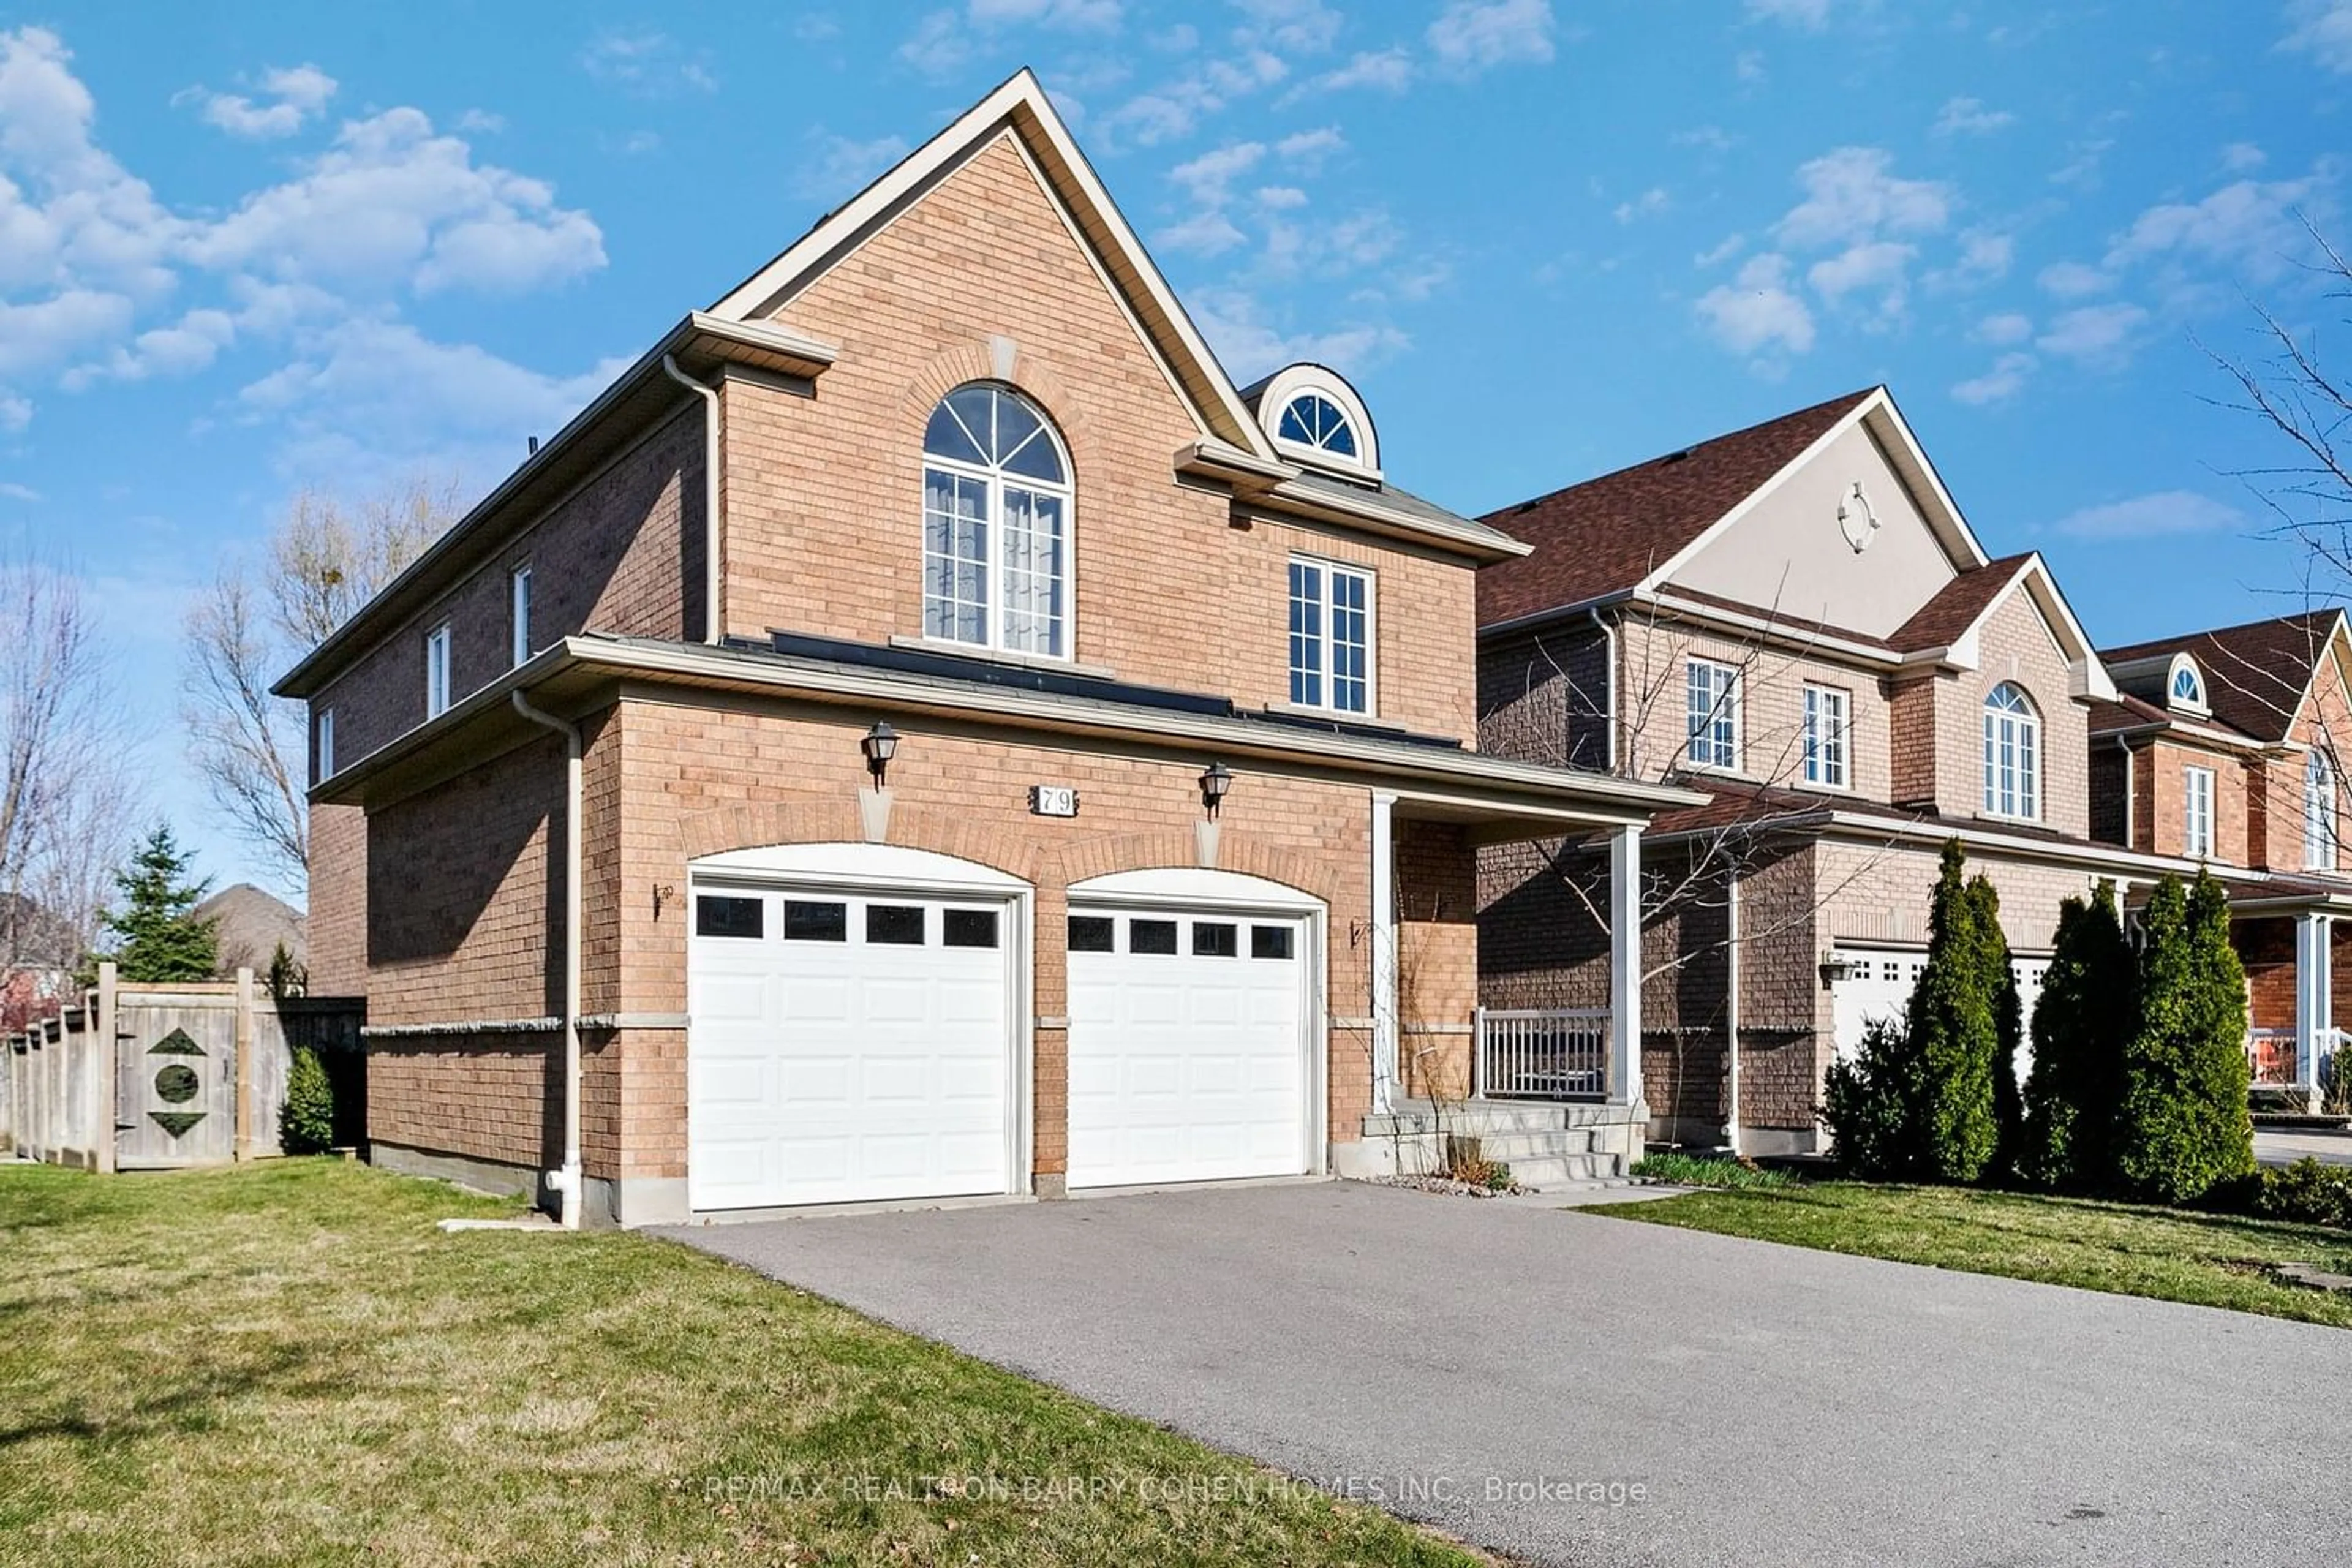 Home with brick exterior material for 79 Giordano Way, Vaughan Ontario L6A 0P7